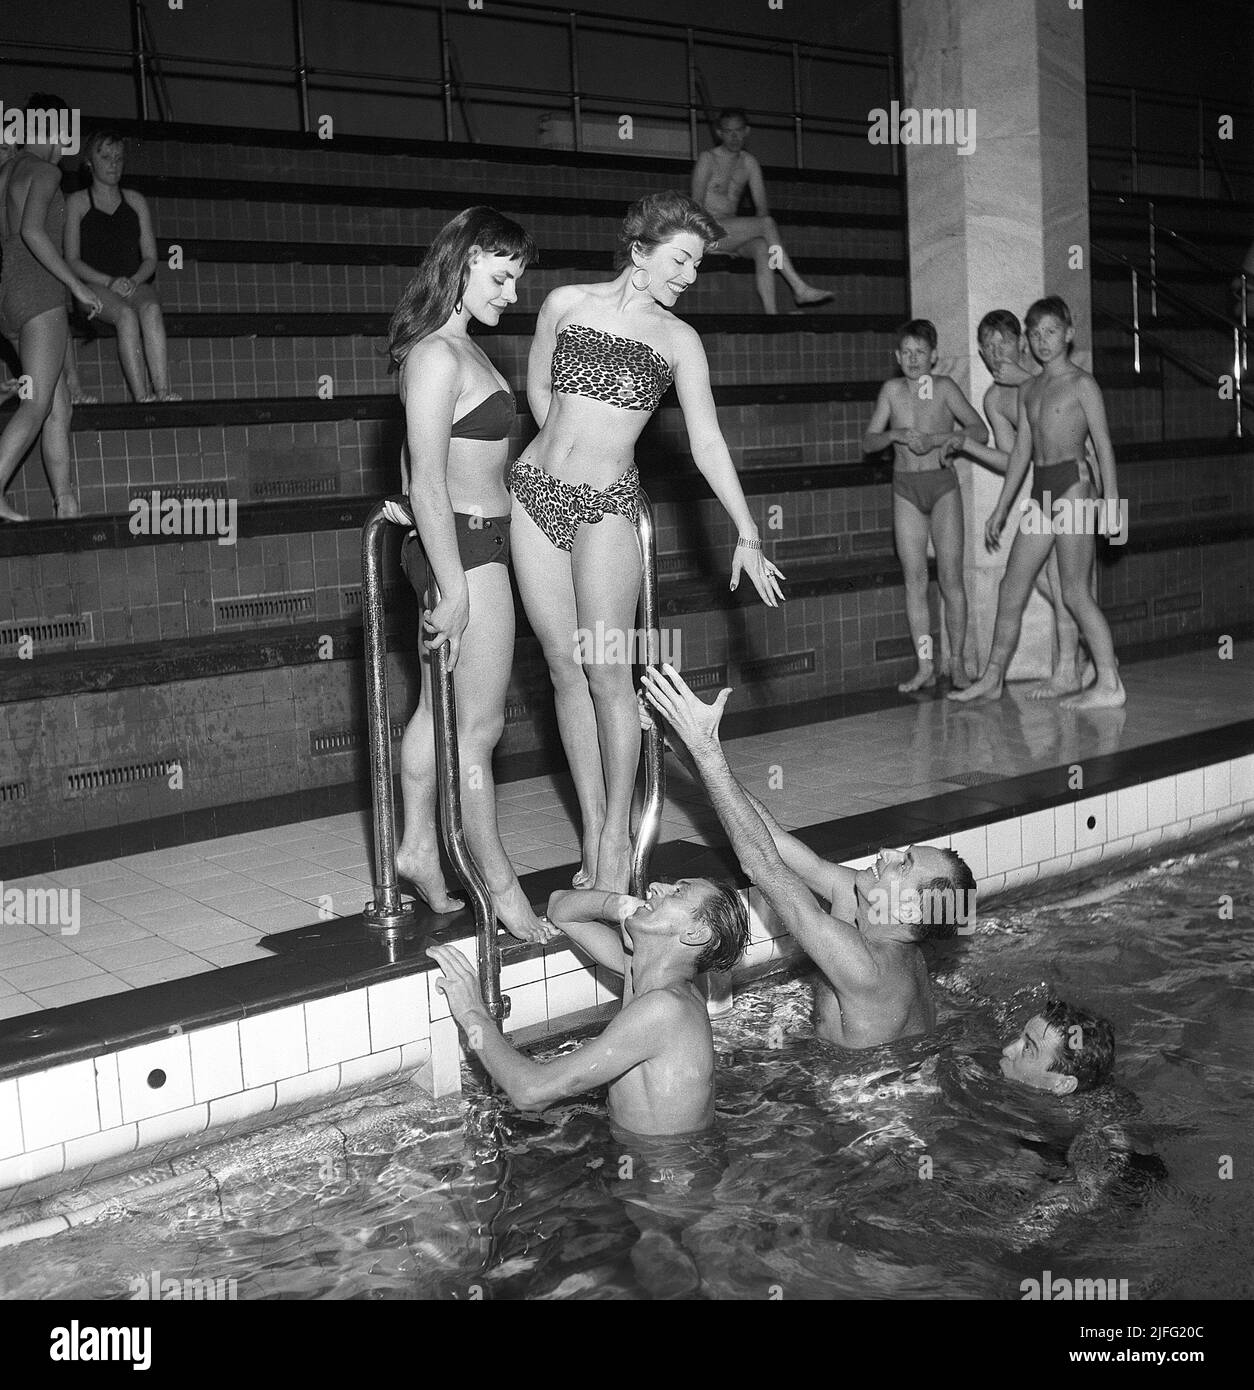 Swimming in the 1950s. A group of grownups are playing by the indoor swimmingpool. They are theatre and filmactors and actresses of the time.  Sweden 1953 Kristoffersson ref BM84-12 Stock Photo